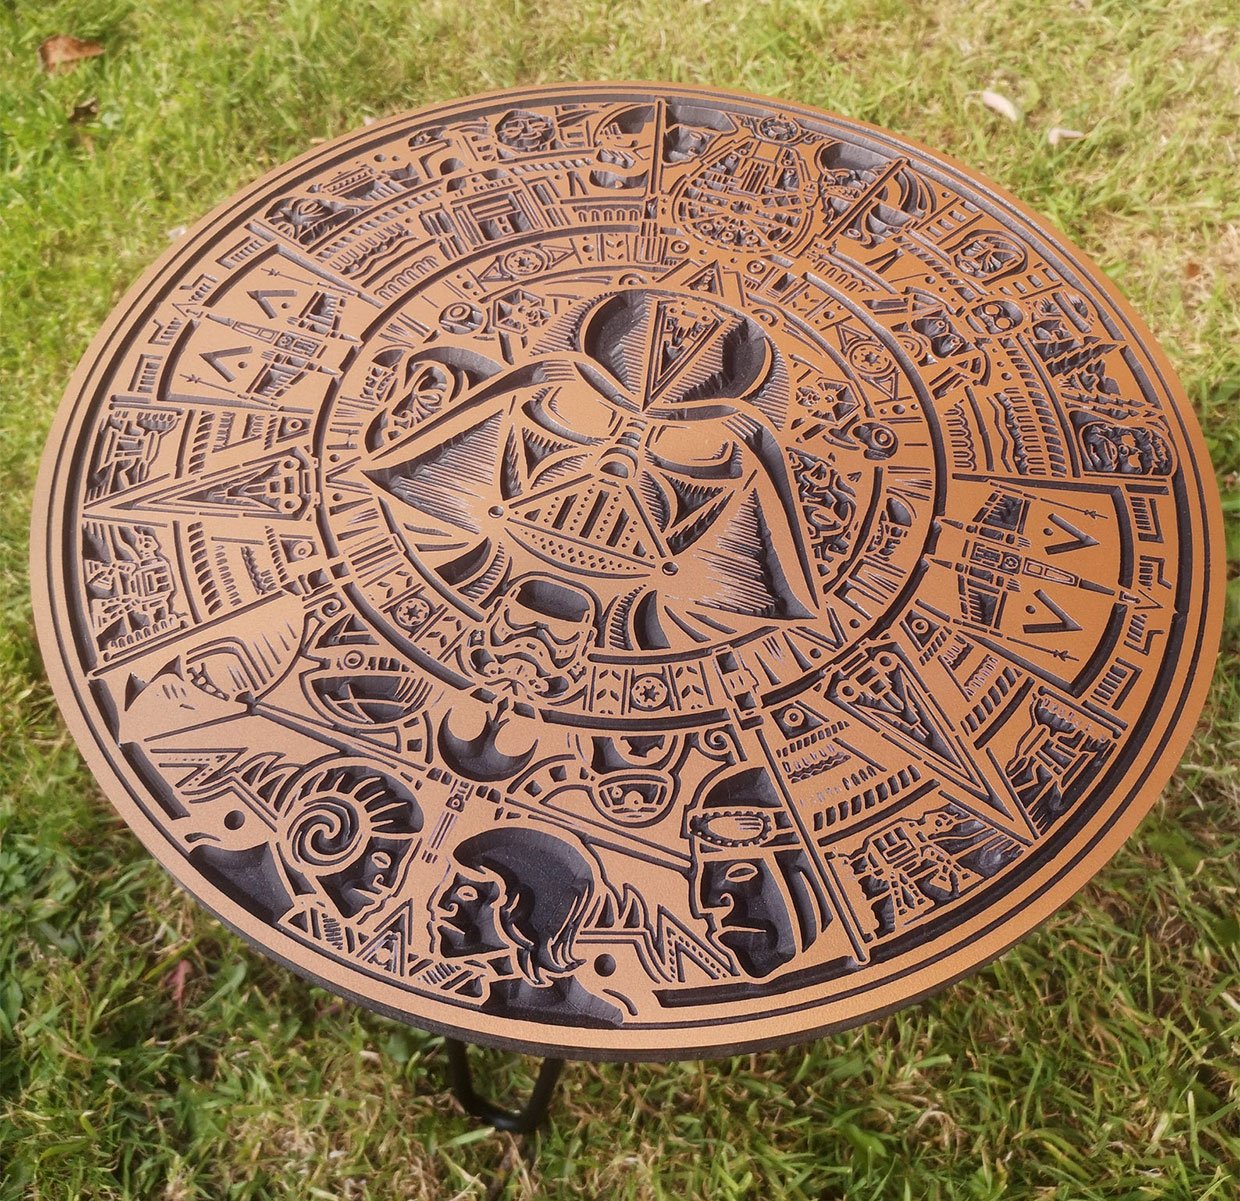 Star Wars Carved Wood Table